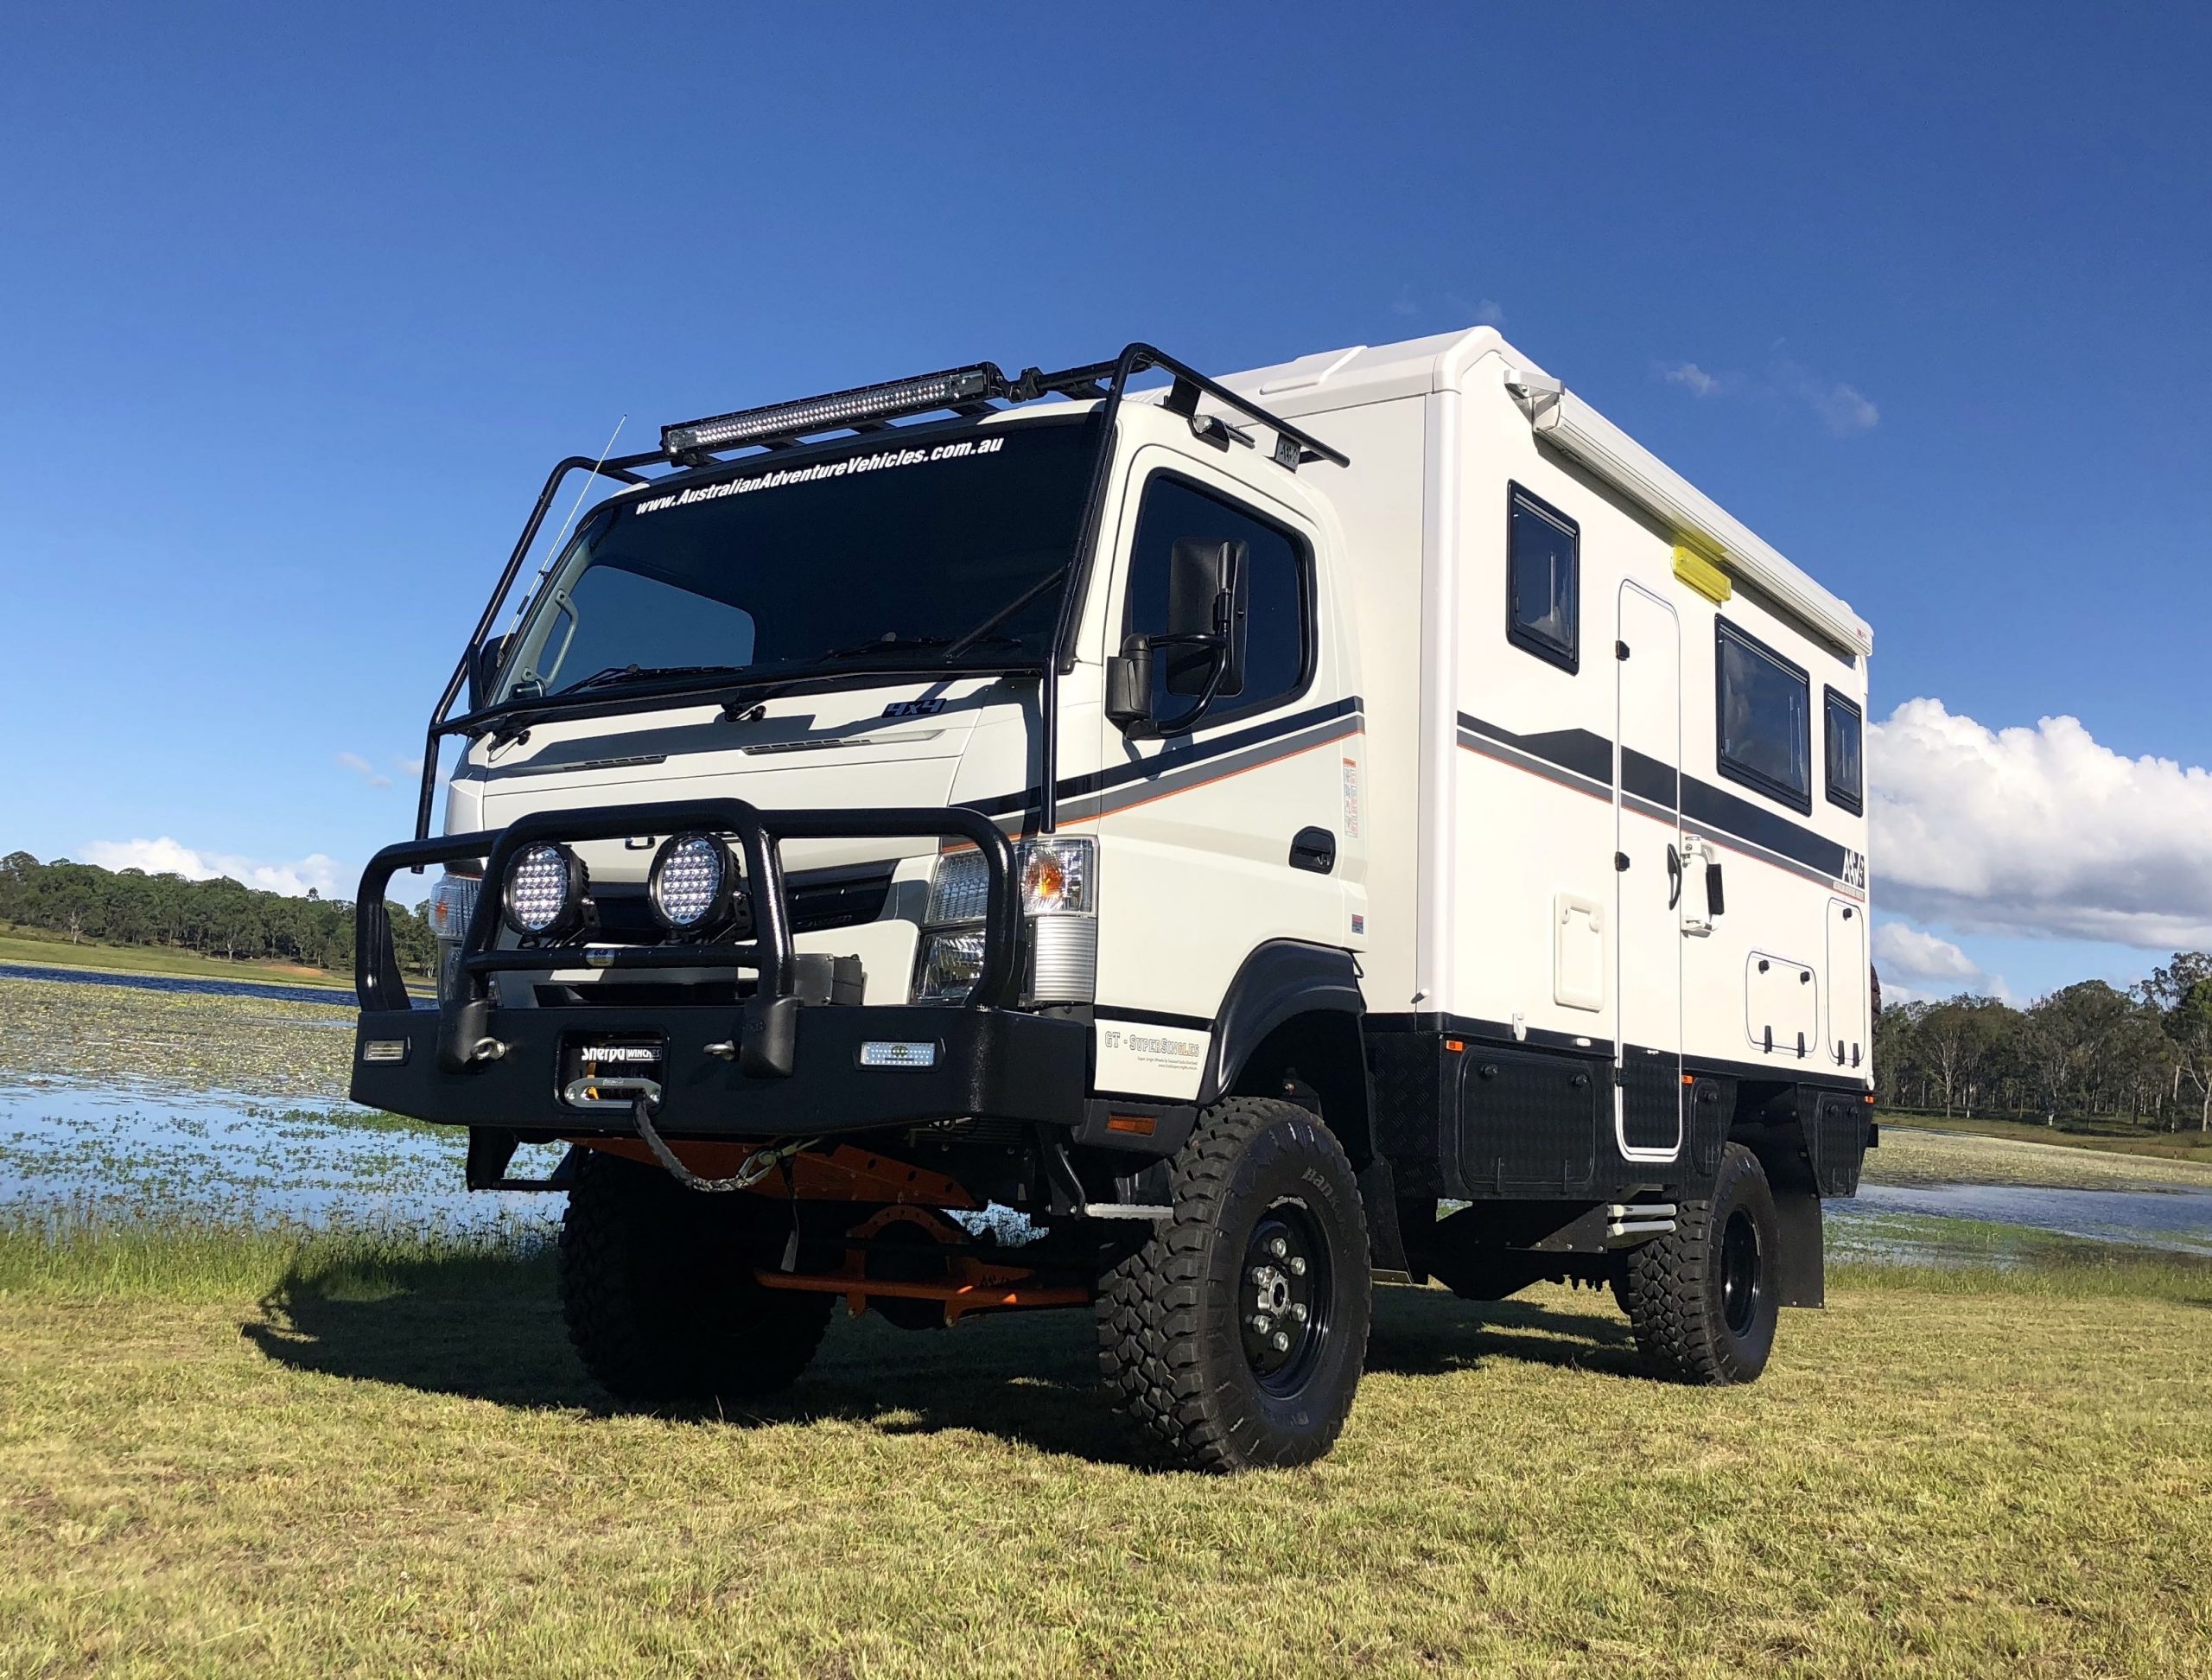 bud Inde industri Offroad 4x4 Motorhomes, Expedition Vehicles, Discovery Motorhomes Australia